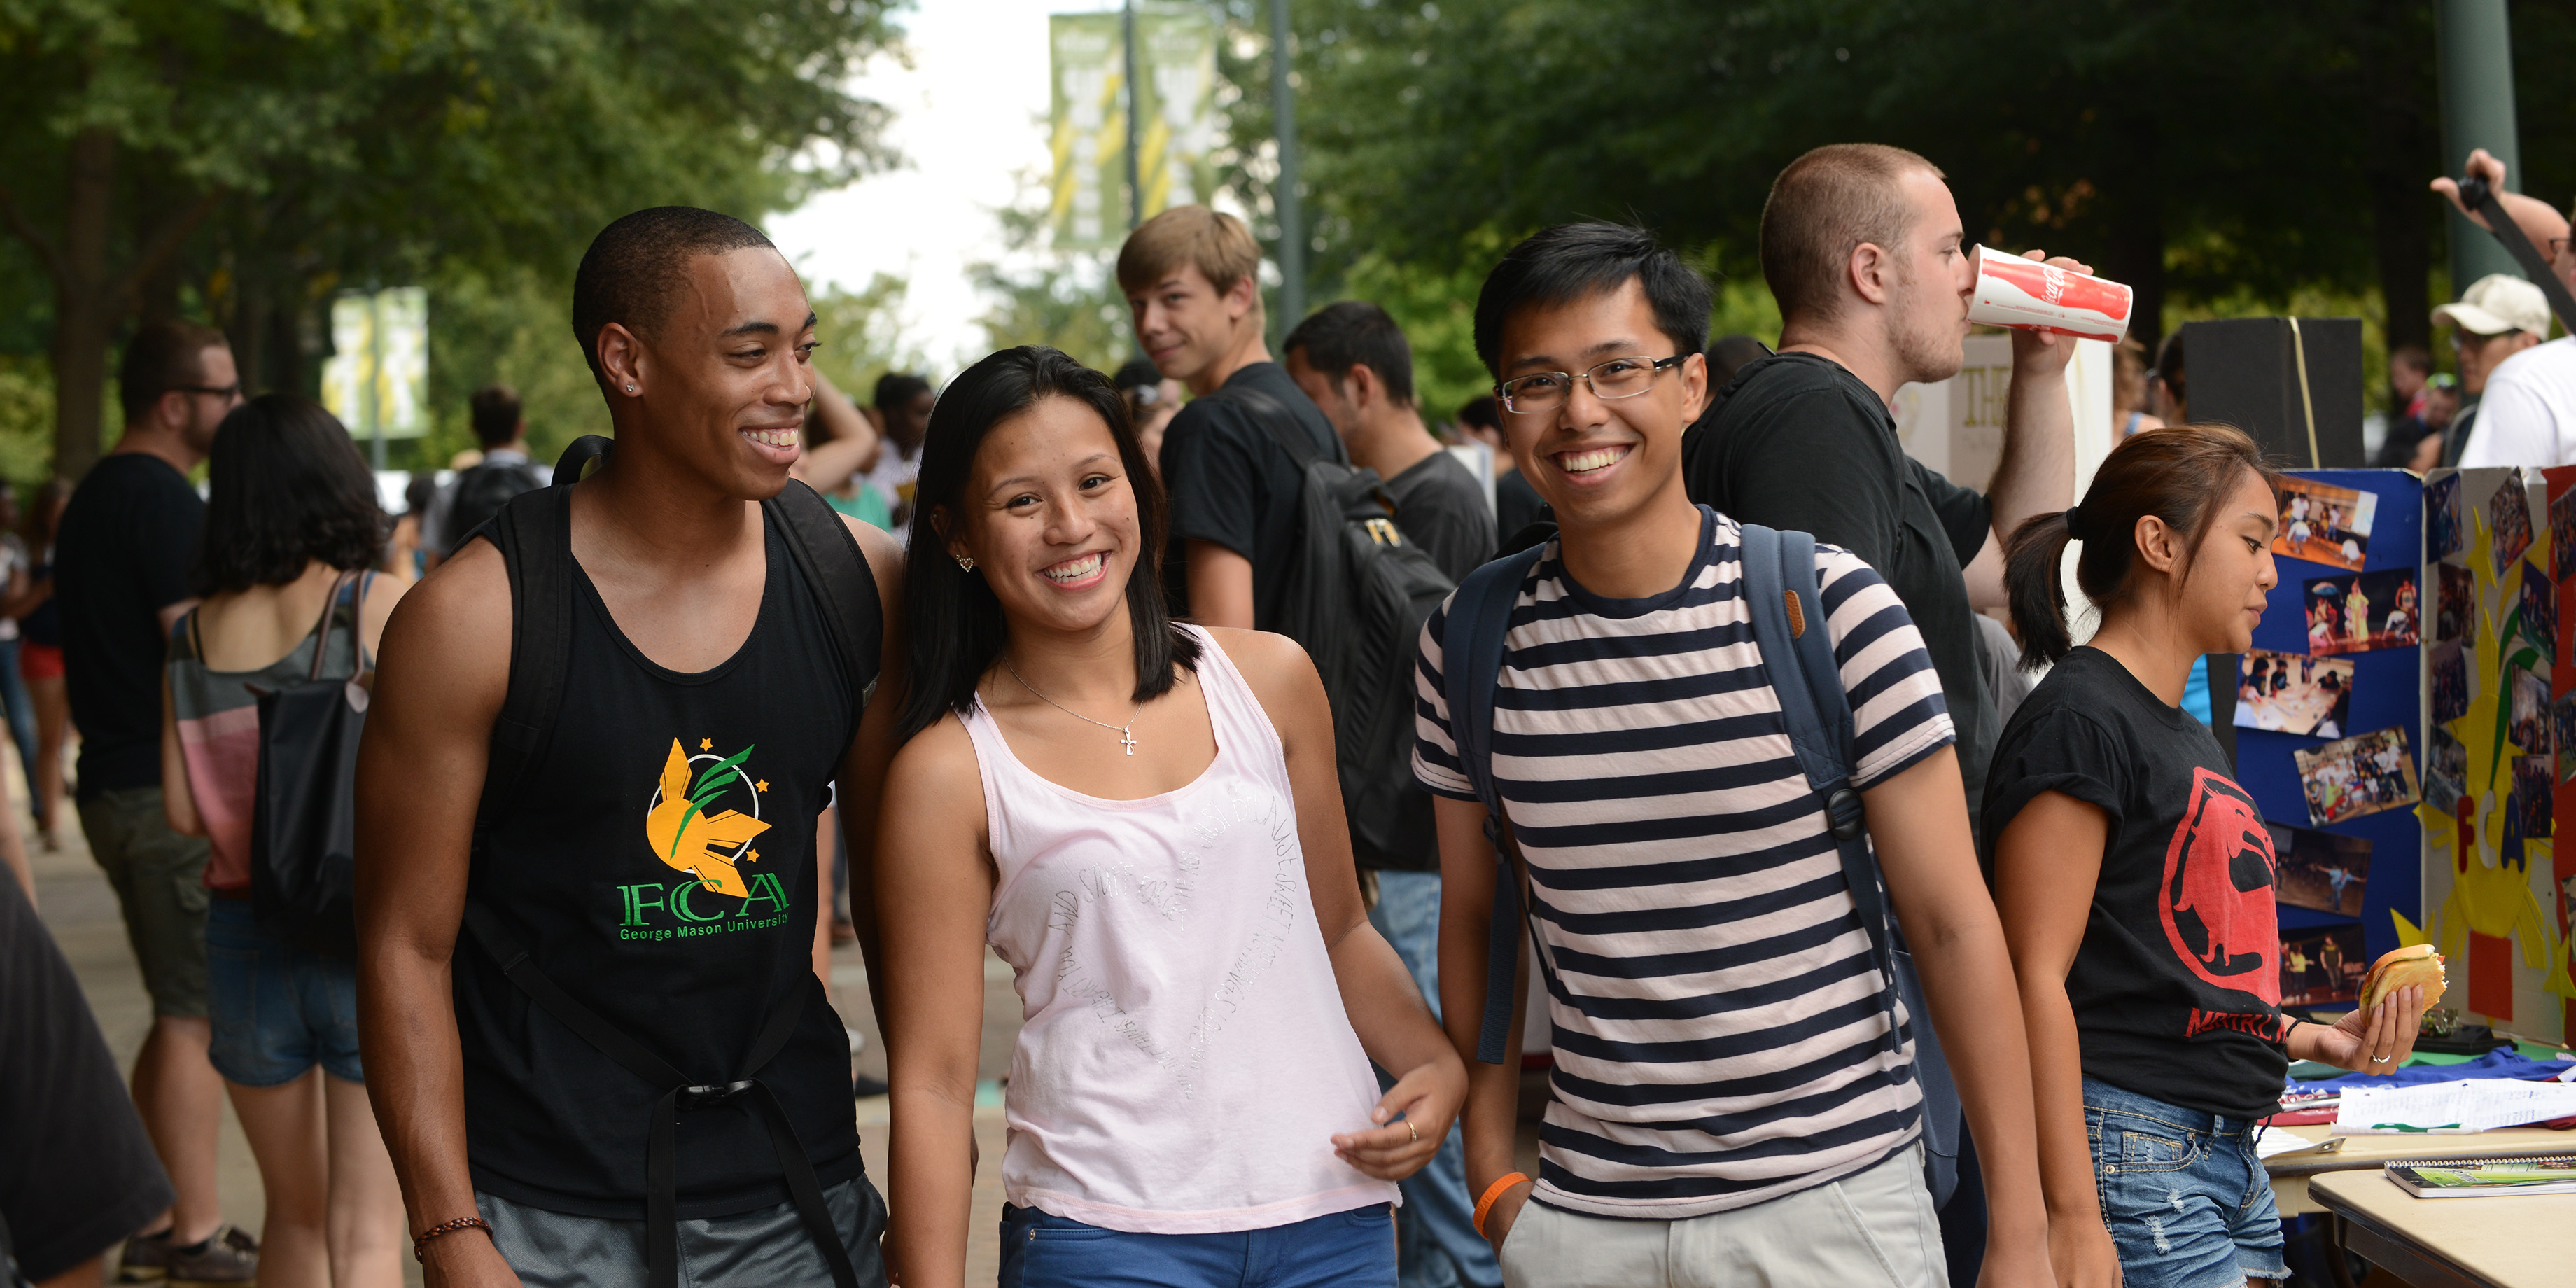 Student attend an on-campus event. Photo by Evan Cantwell/Creative Services/George Mason University